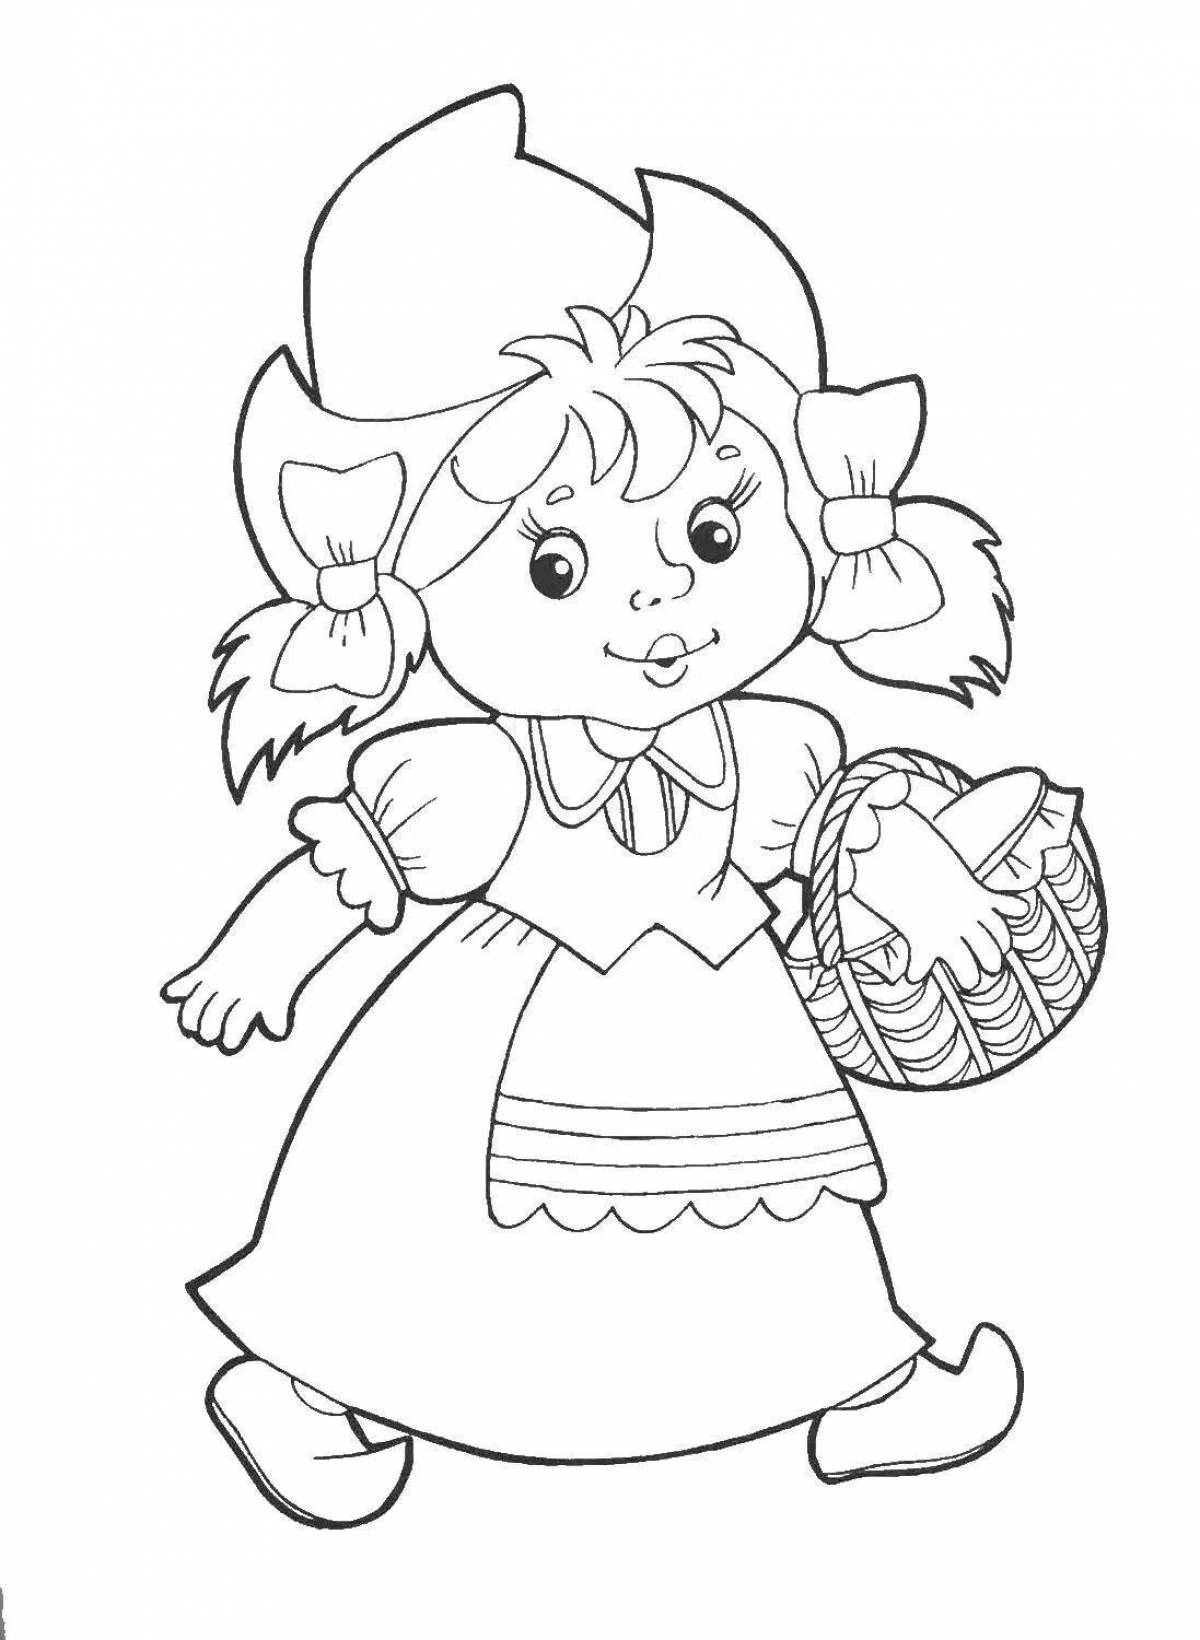 Amazing fairy tale coloring pages for kids